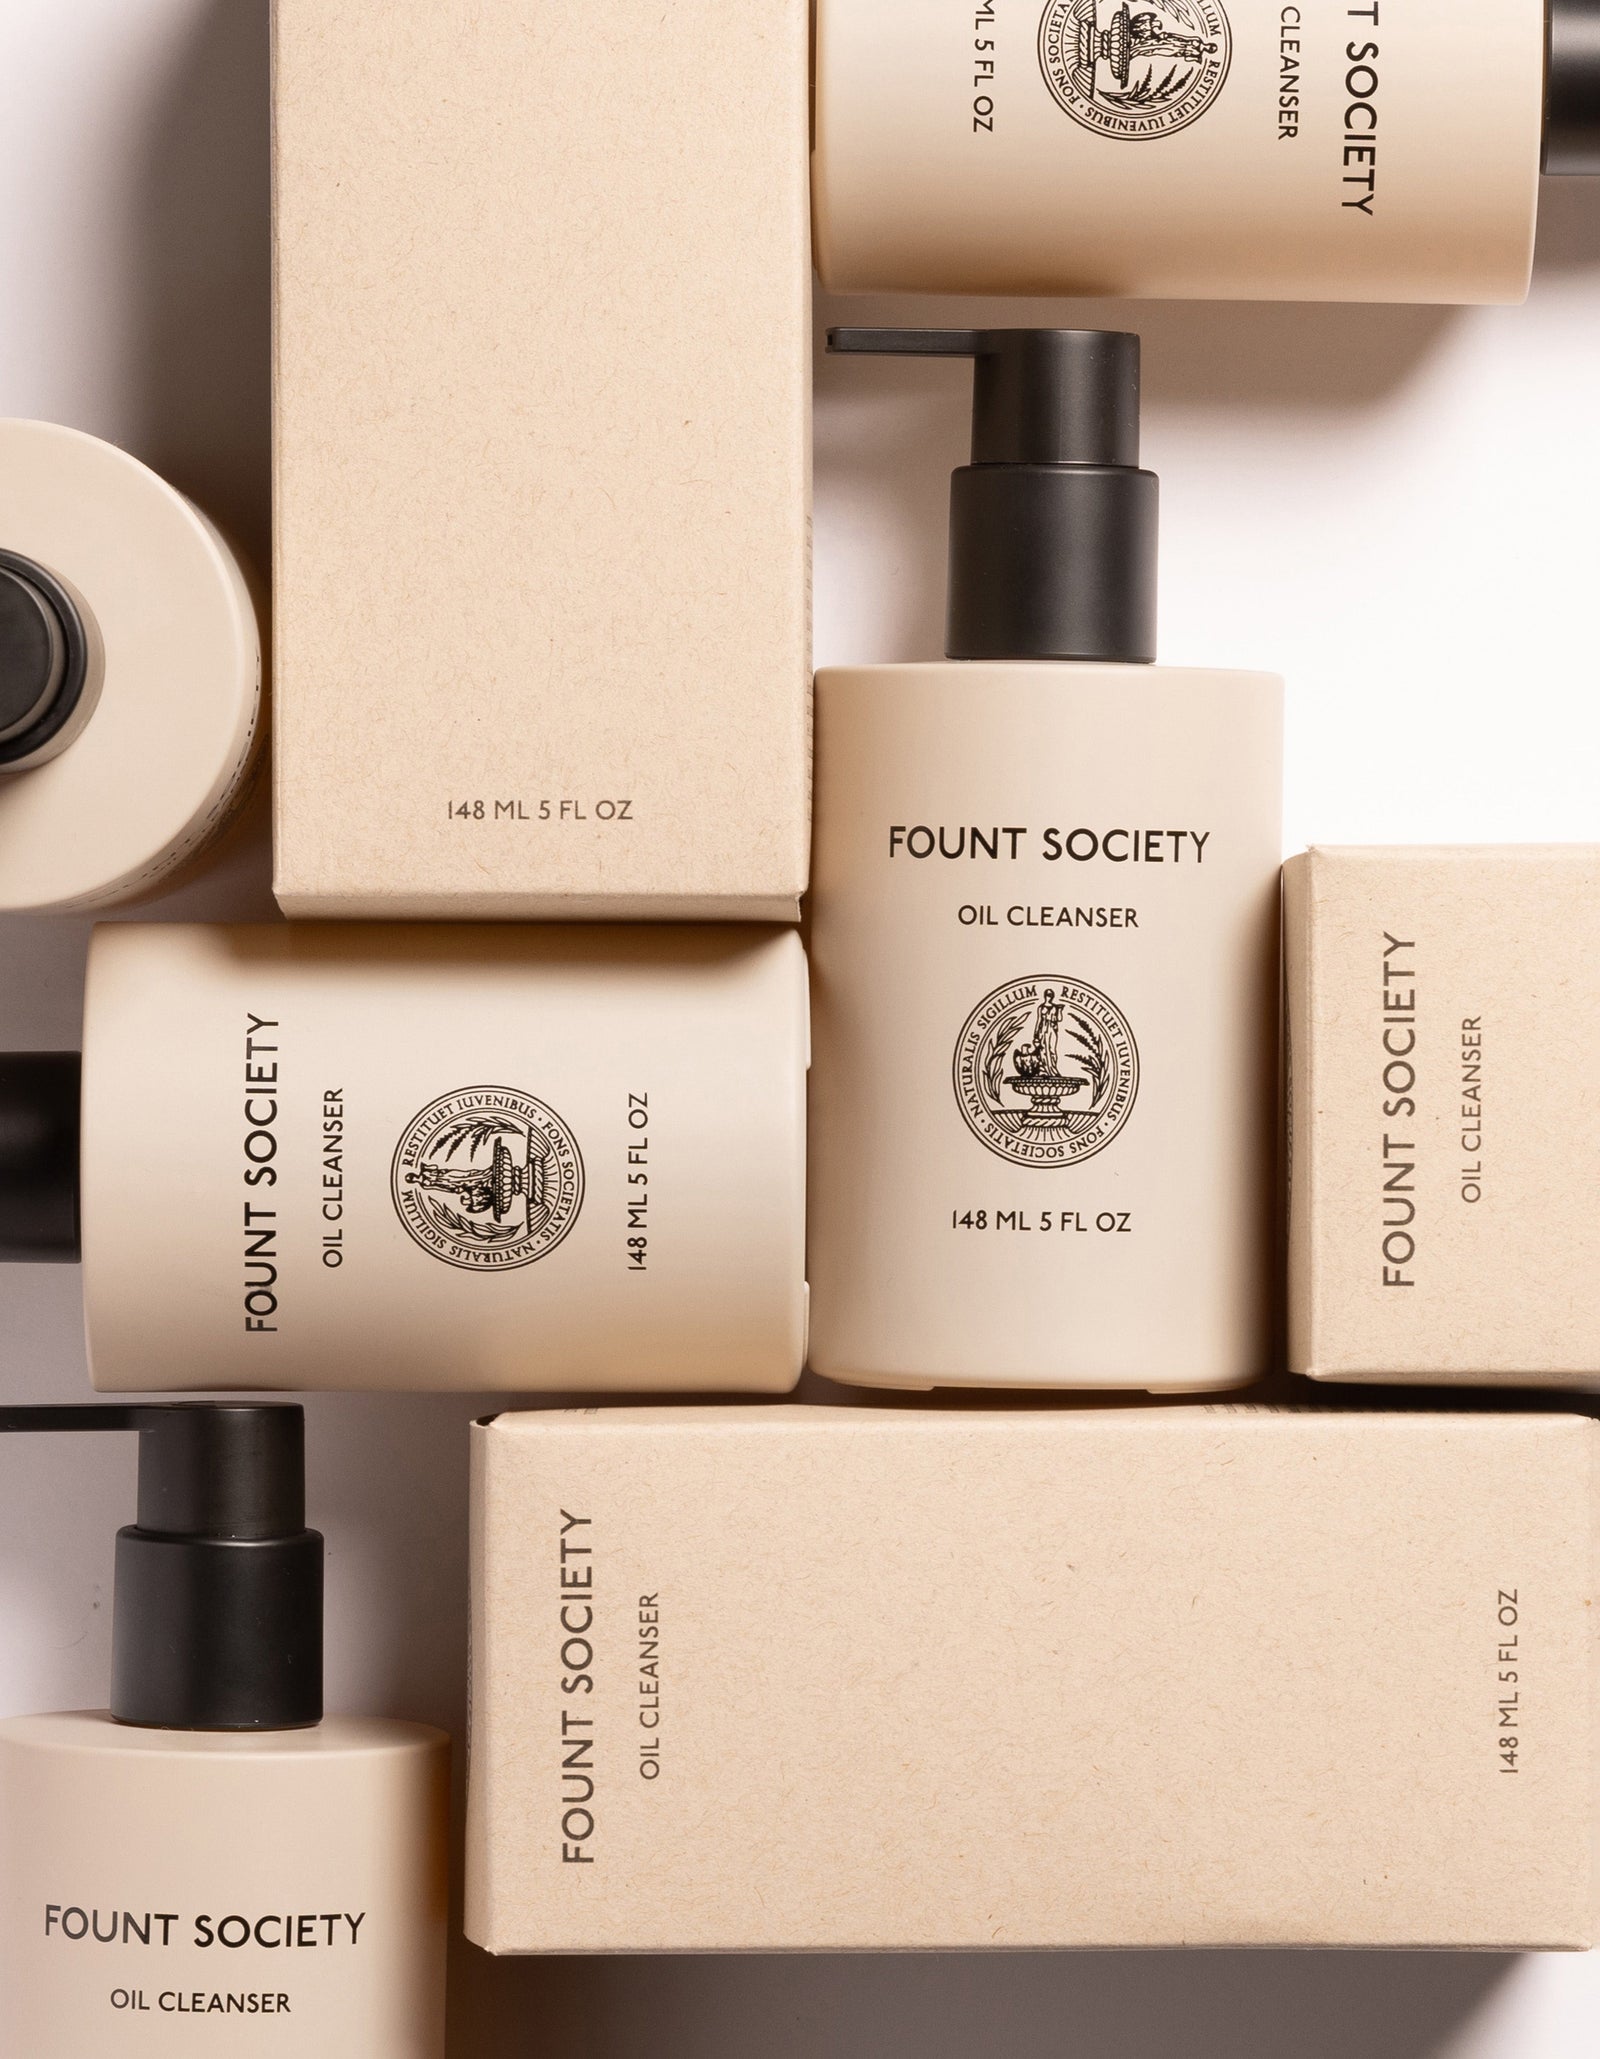 A display of "Revitalizing Pair" oil cleanser bottles and boxes from Cozy Earth arranged in a grid pattern. The bottles are light beige with black pumps and cylindrical in shape. The packaging features a minimalist design with black text and a circular emblem.